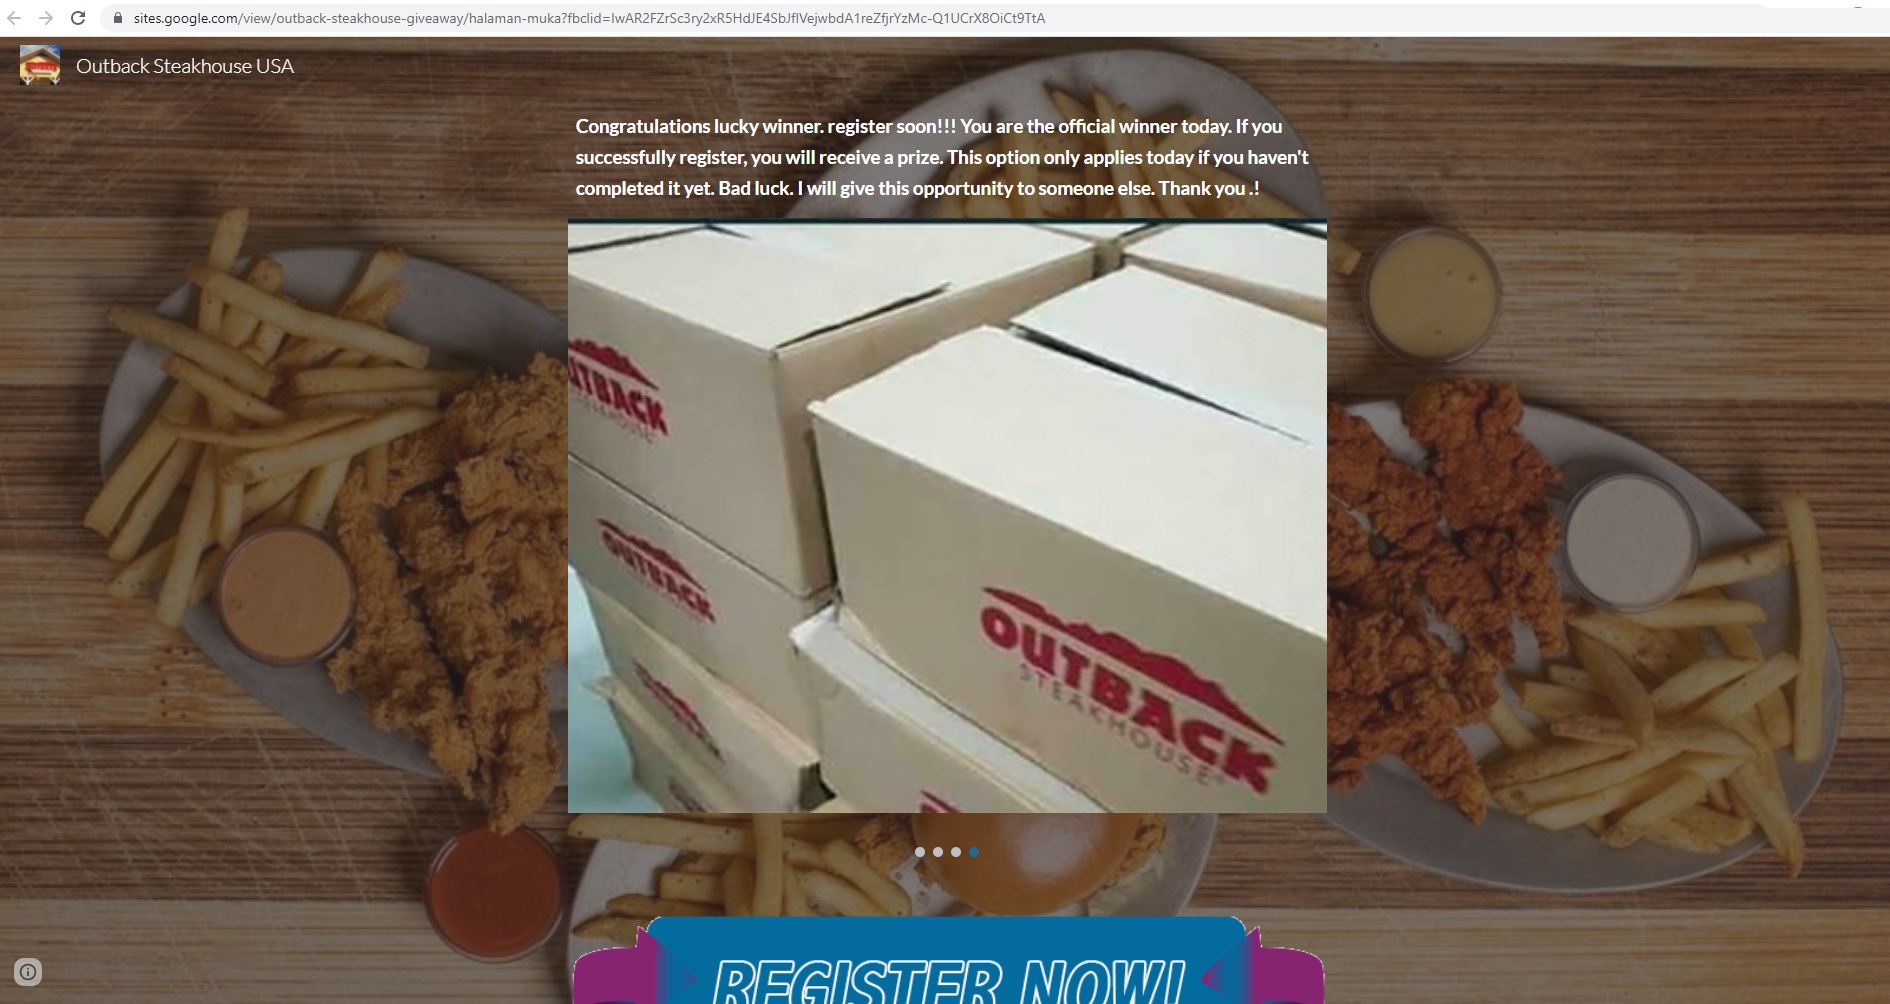 The Outback Steakhouse Giveaway Fake Website